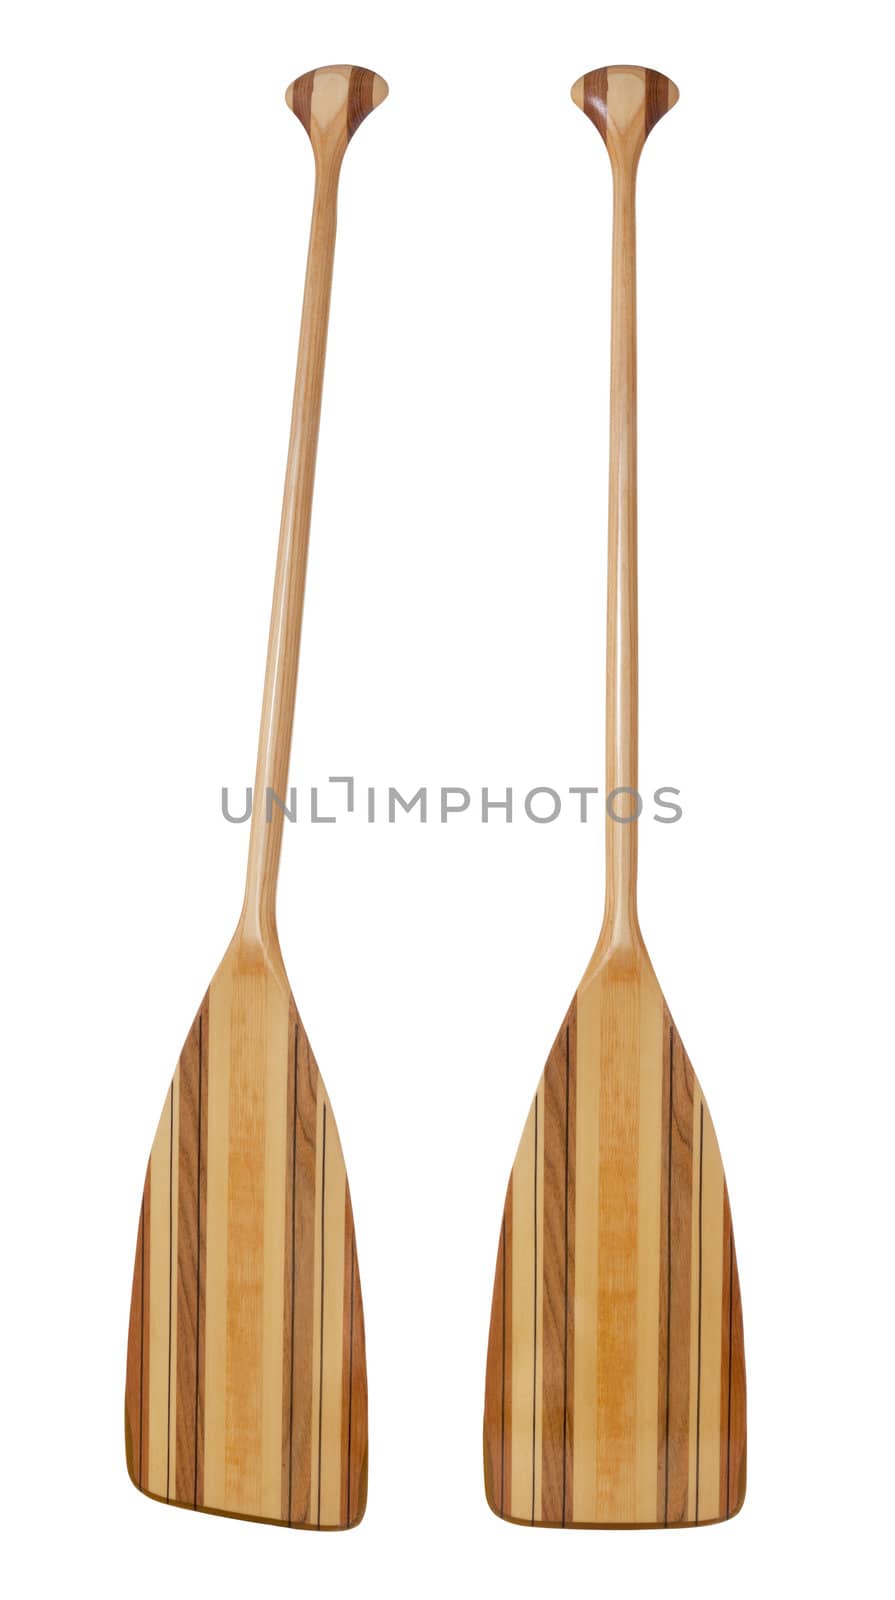 wooden (basswood, butternut and red alder)) cruising canoe paddle with bent shaft and tip reinforced with fiberglass, isolated on white, two views